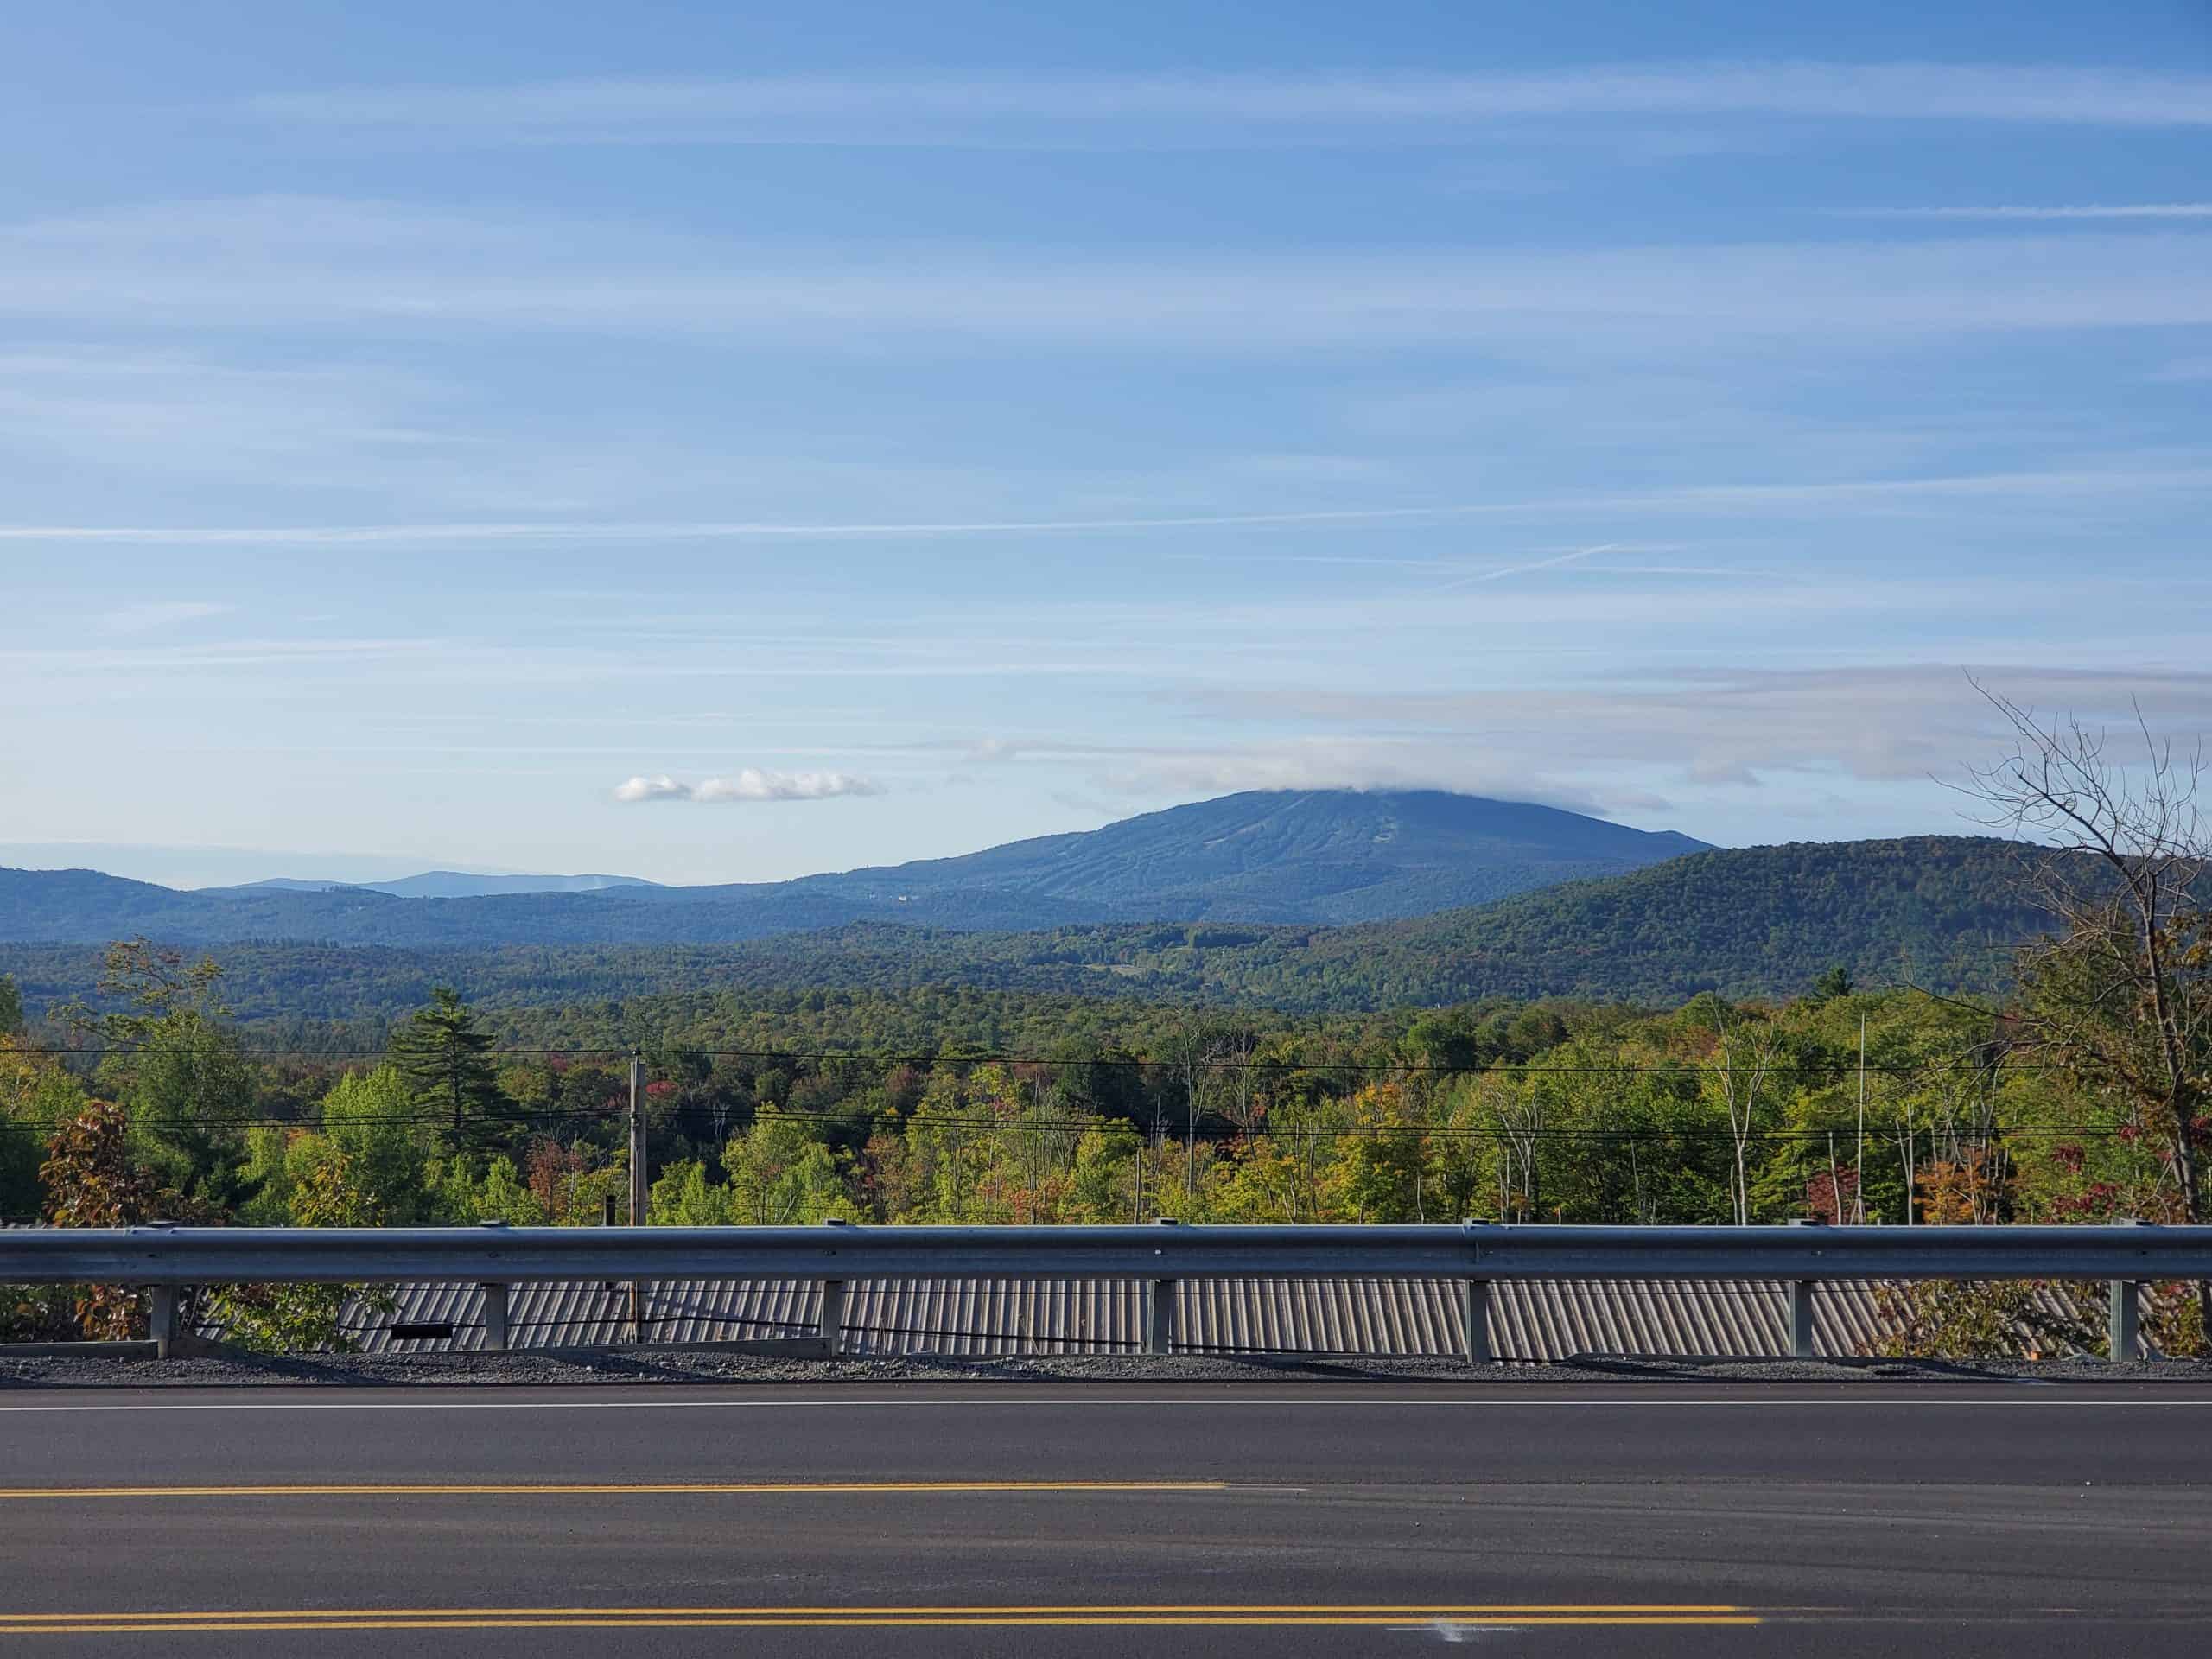 2019-09-16 View of Stratton - Photo by Renee-Marie Smith